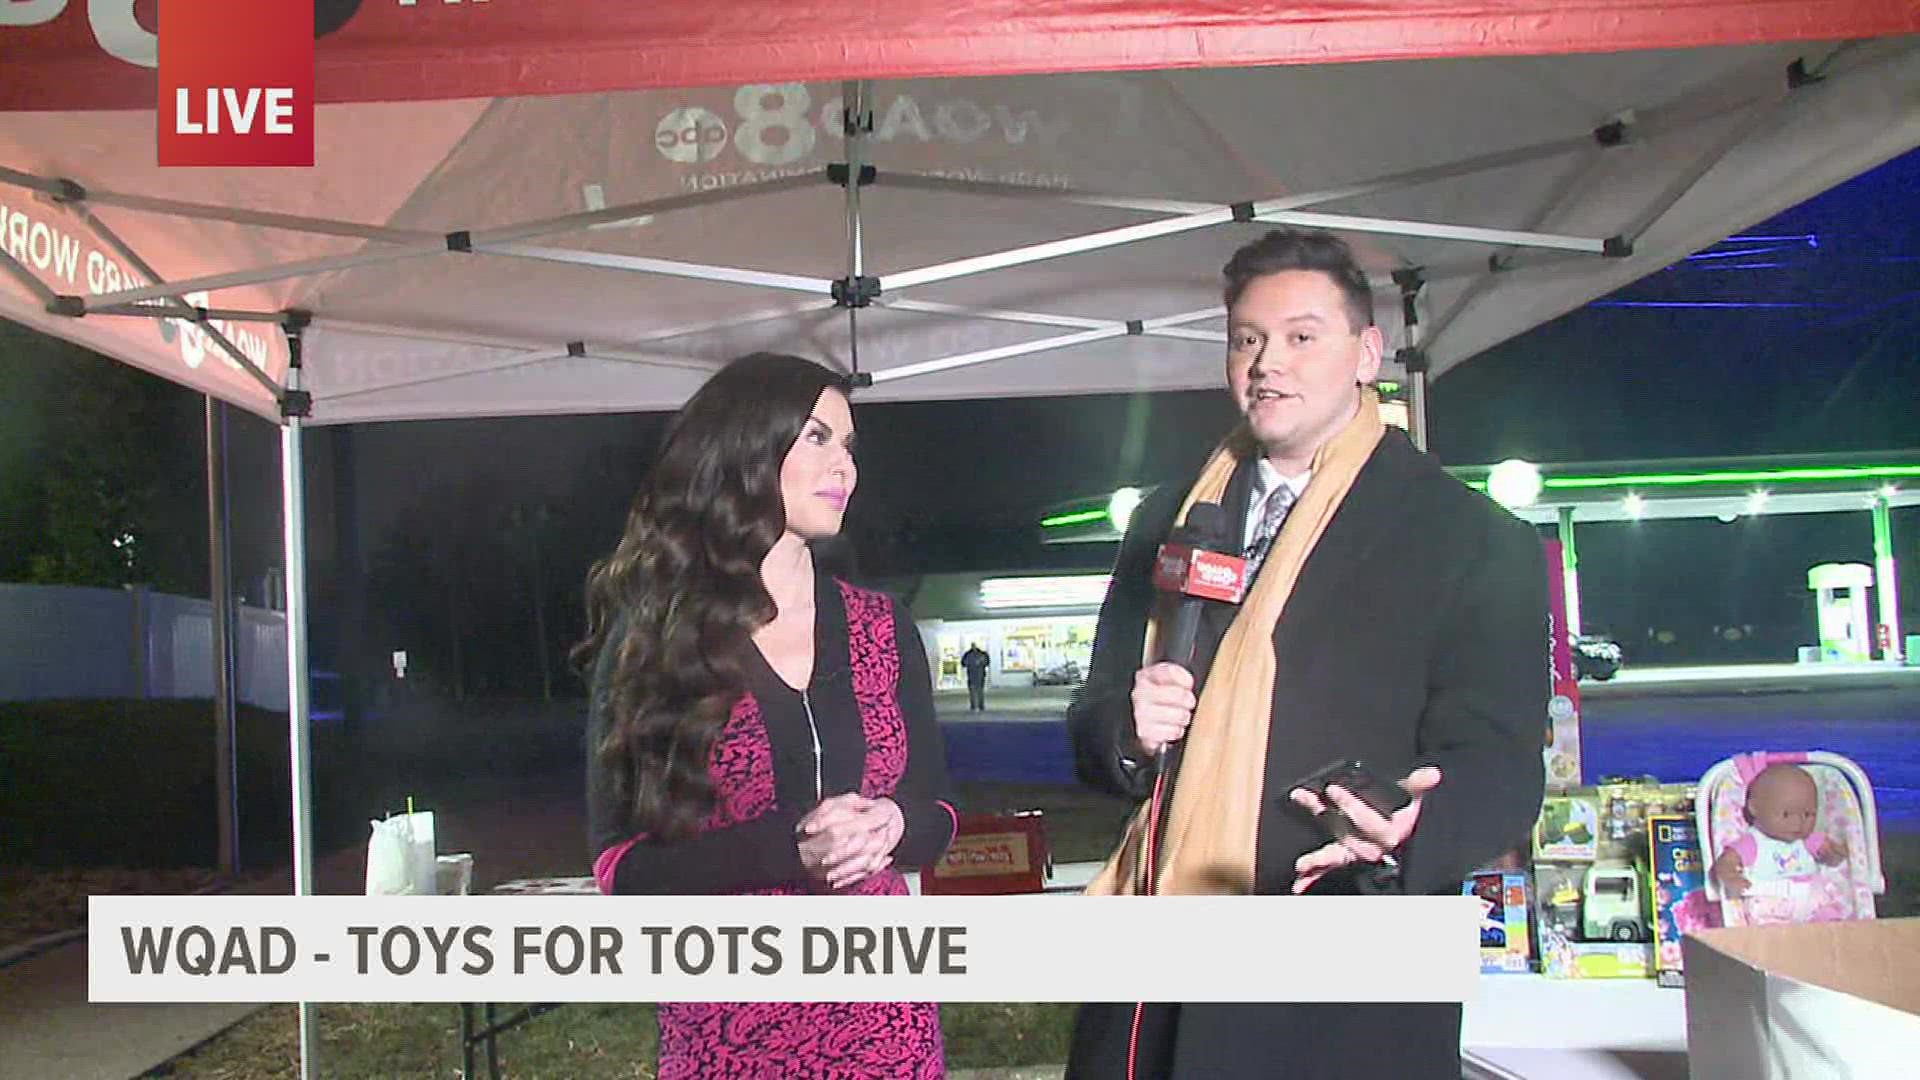 WQAD has our own Toys for Tots Drive going on all throughout today outside of the station!